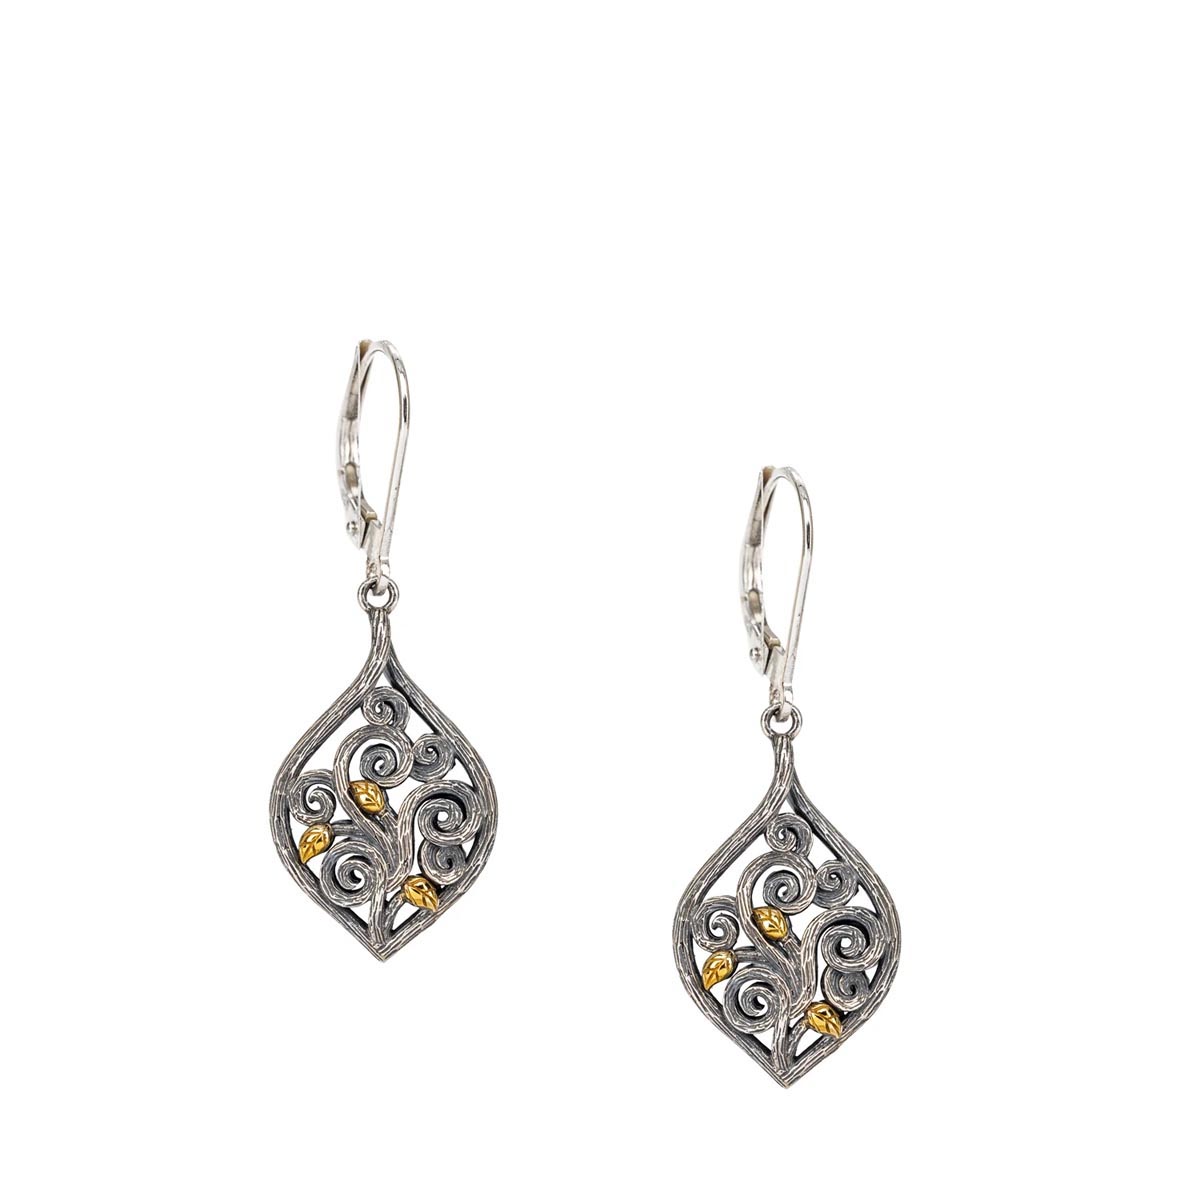 Keith Jack Tree of Life Drop Earrings in Sterling Silver and 10kt Yellow Gold